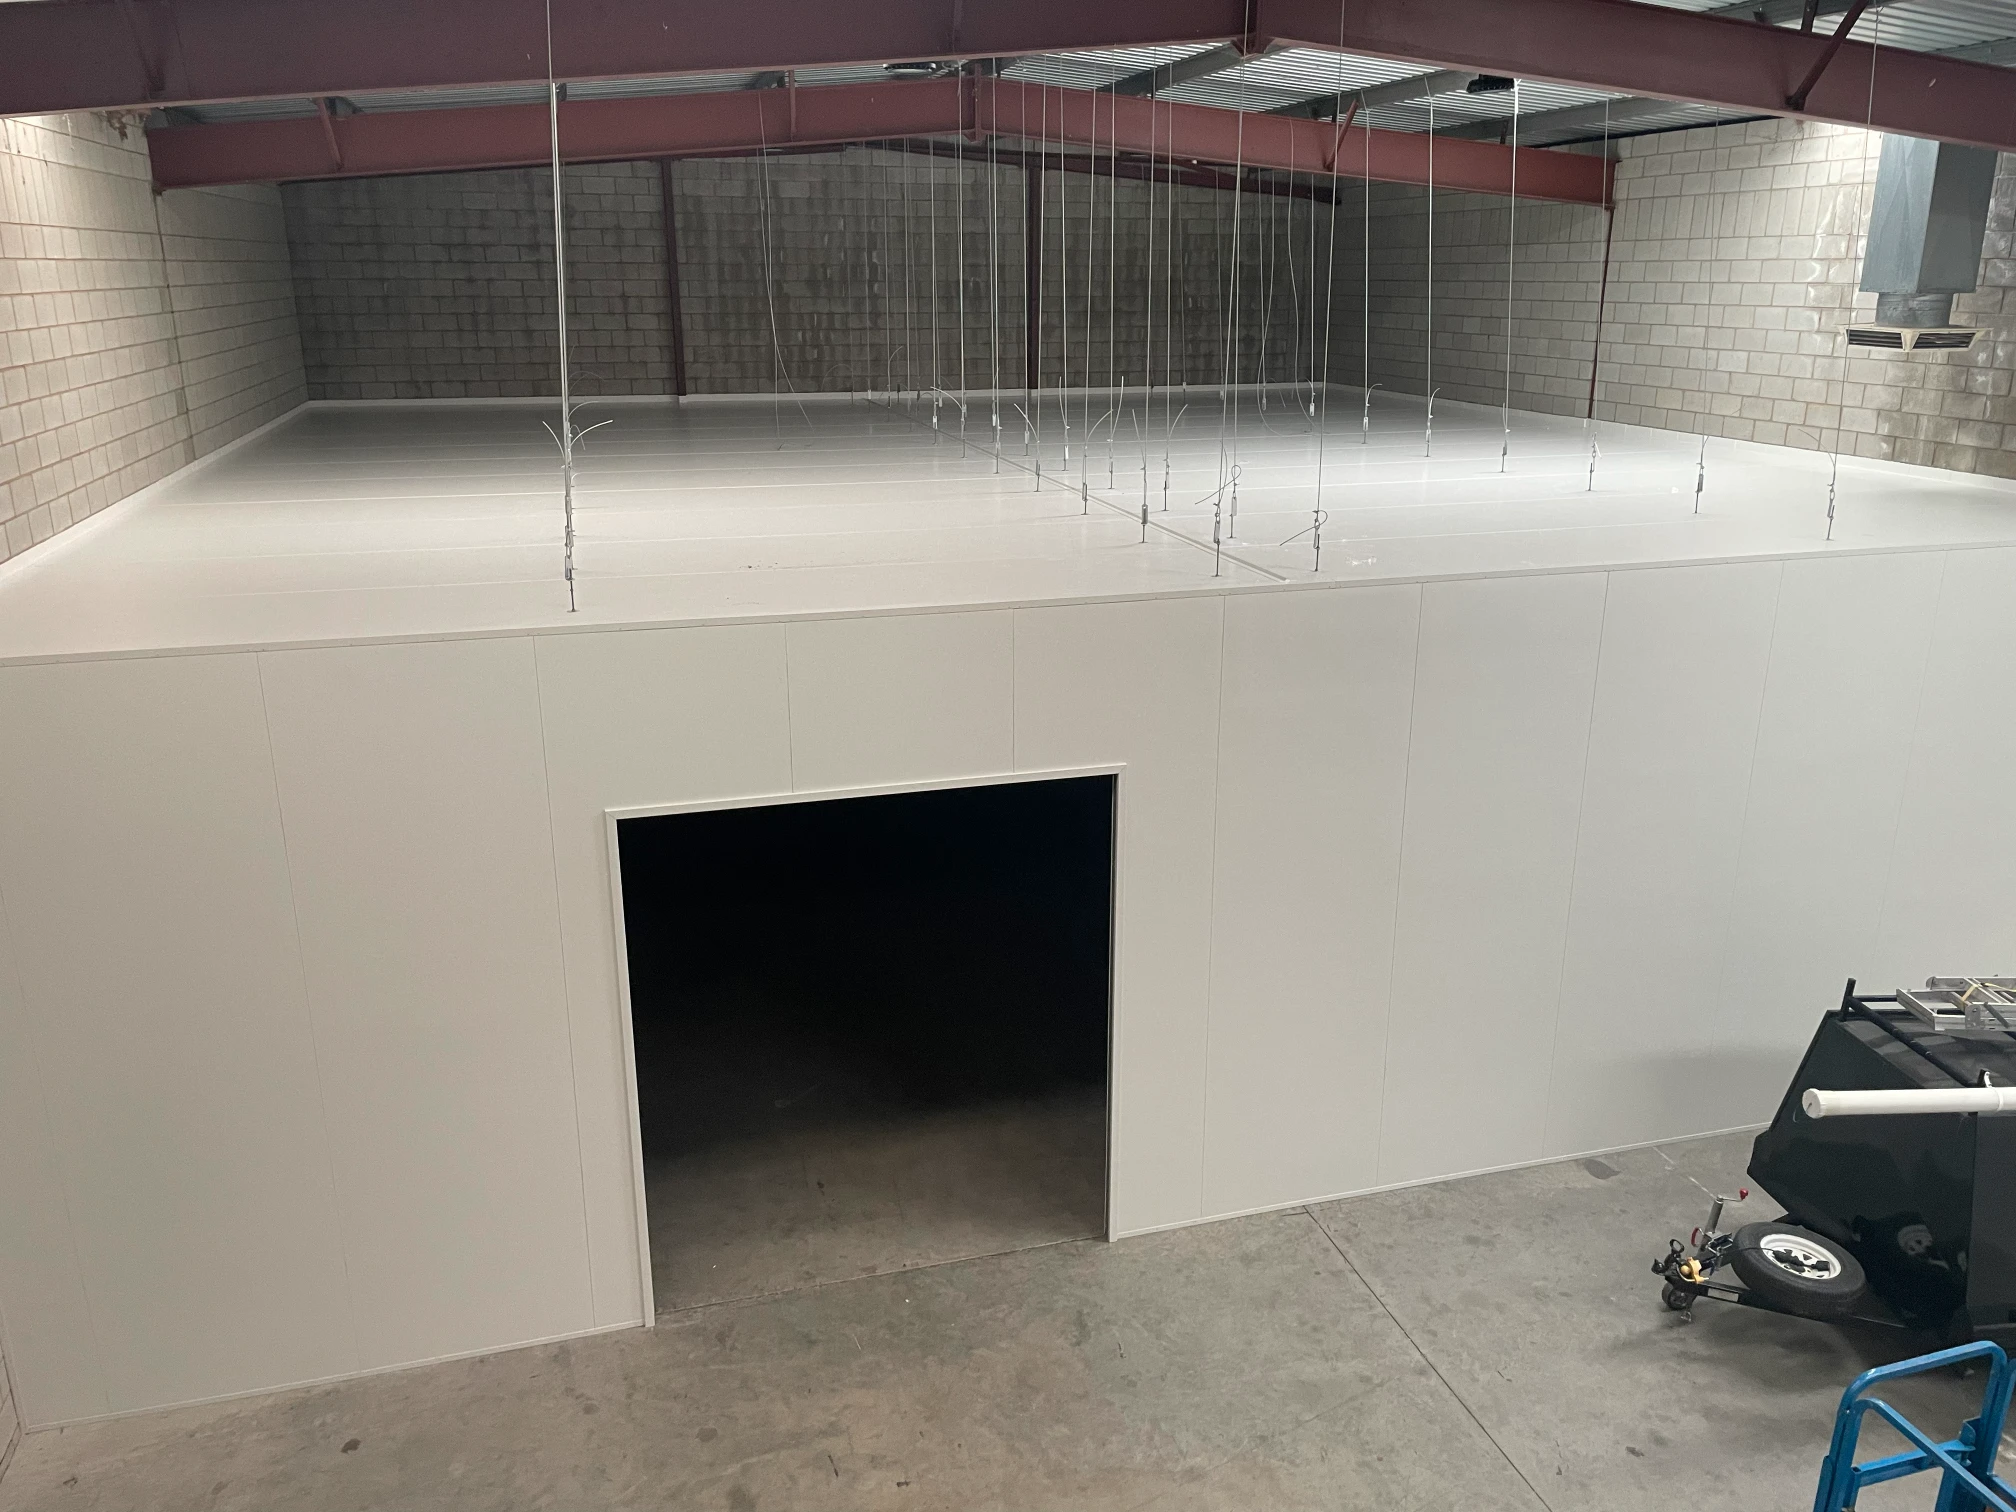 White storage room being constructed within a larger warehouse in Adelaide